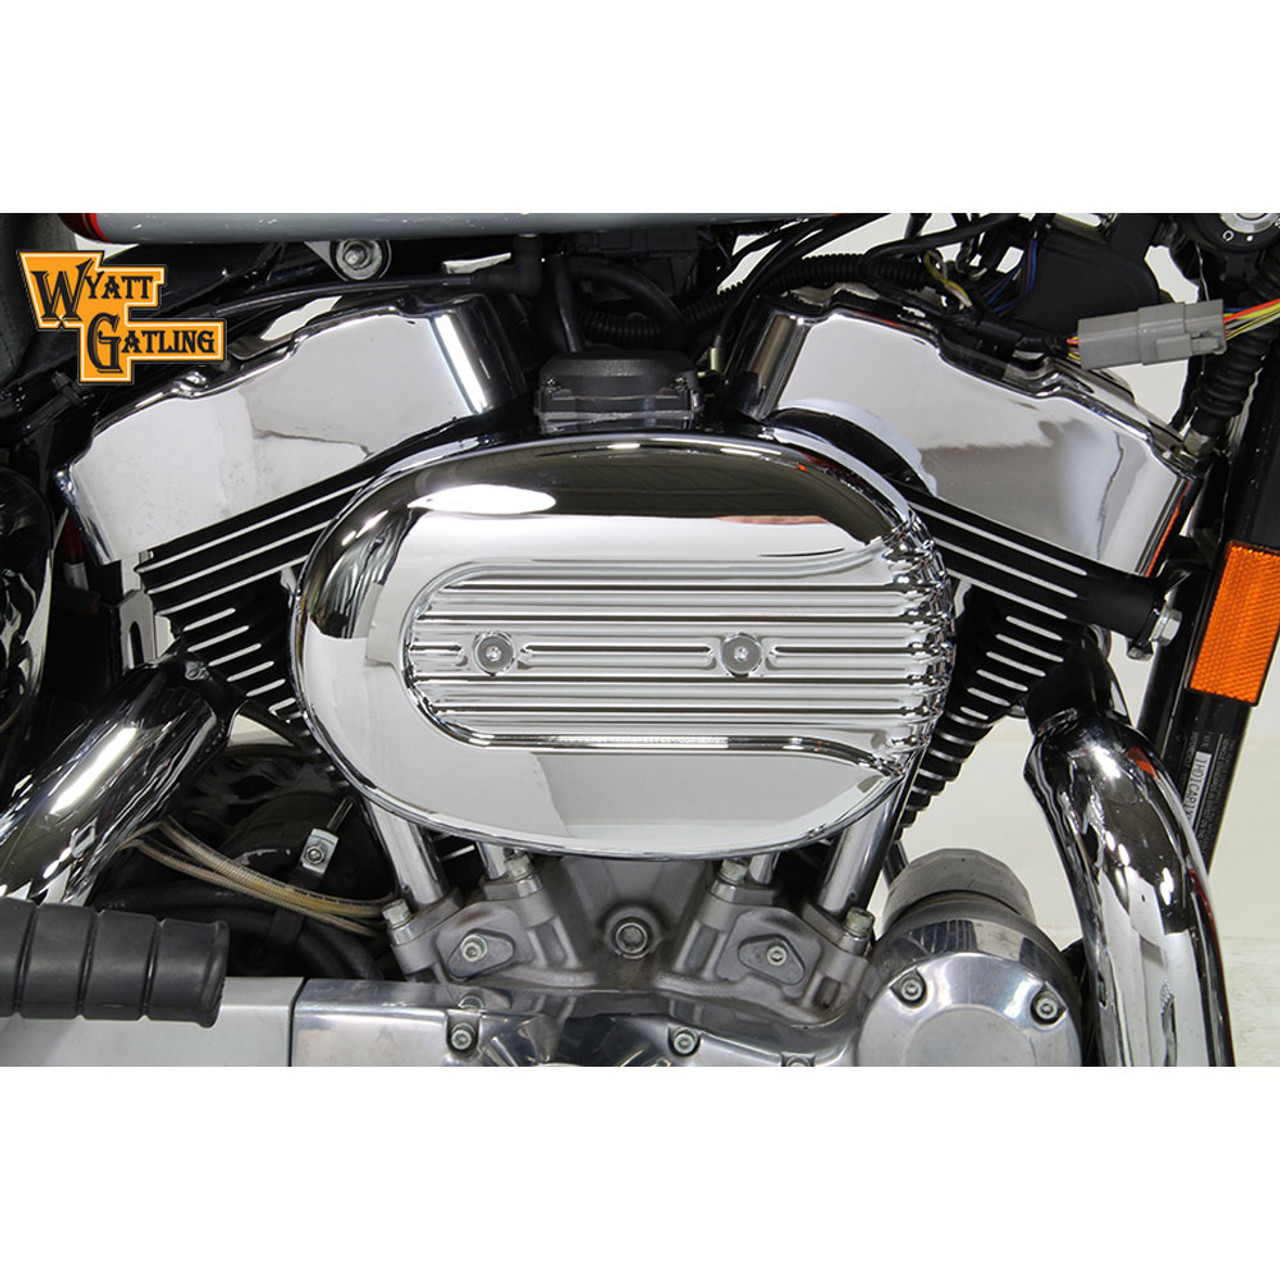 https://cdn11.bigcommerce.com/s-5m0fr/images/stencil/1280x1280/products/4961/36417/v-twin_air_cleaner_harley_sportster_chrome_oval_late_style_34-1693a__09044.1462982254.jpg?c=2